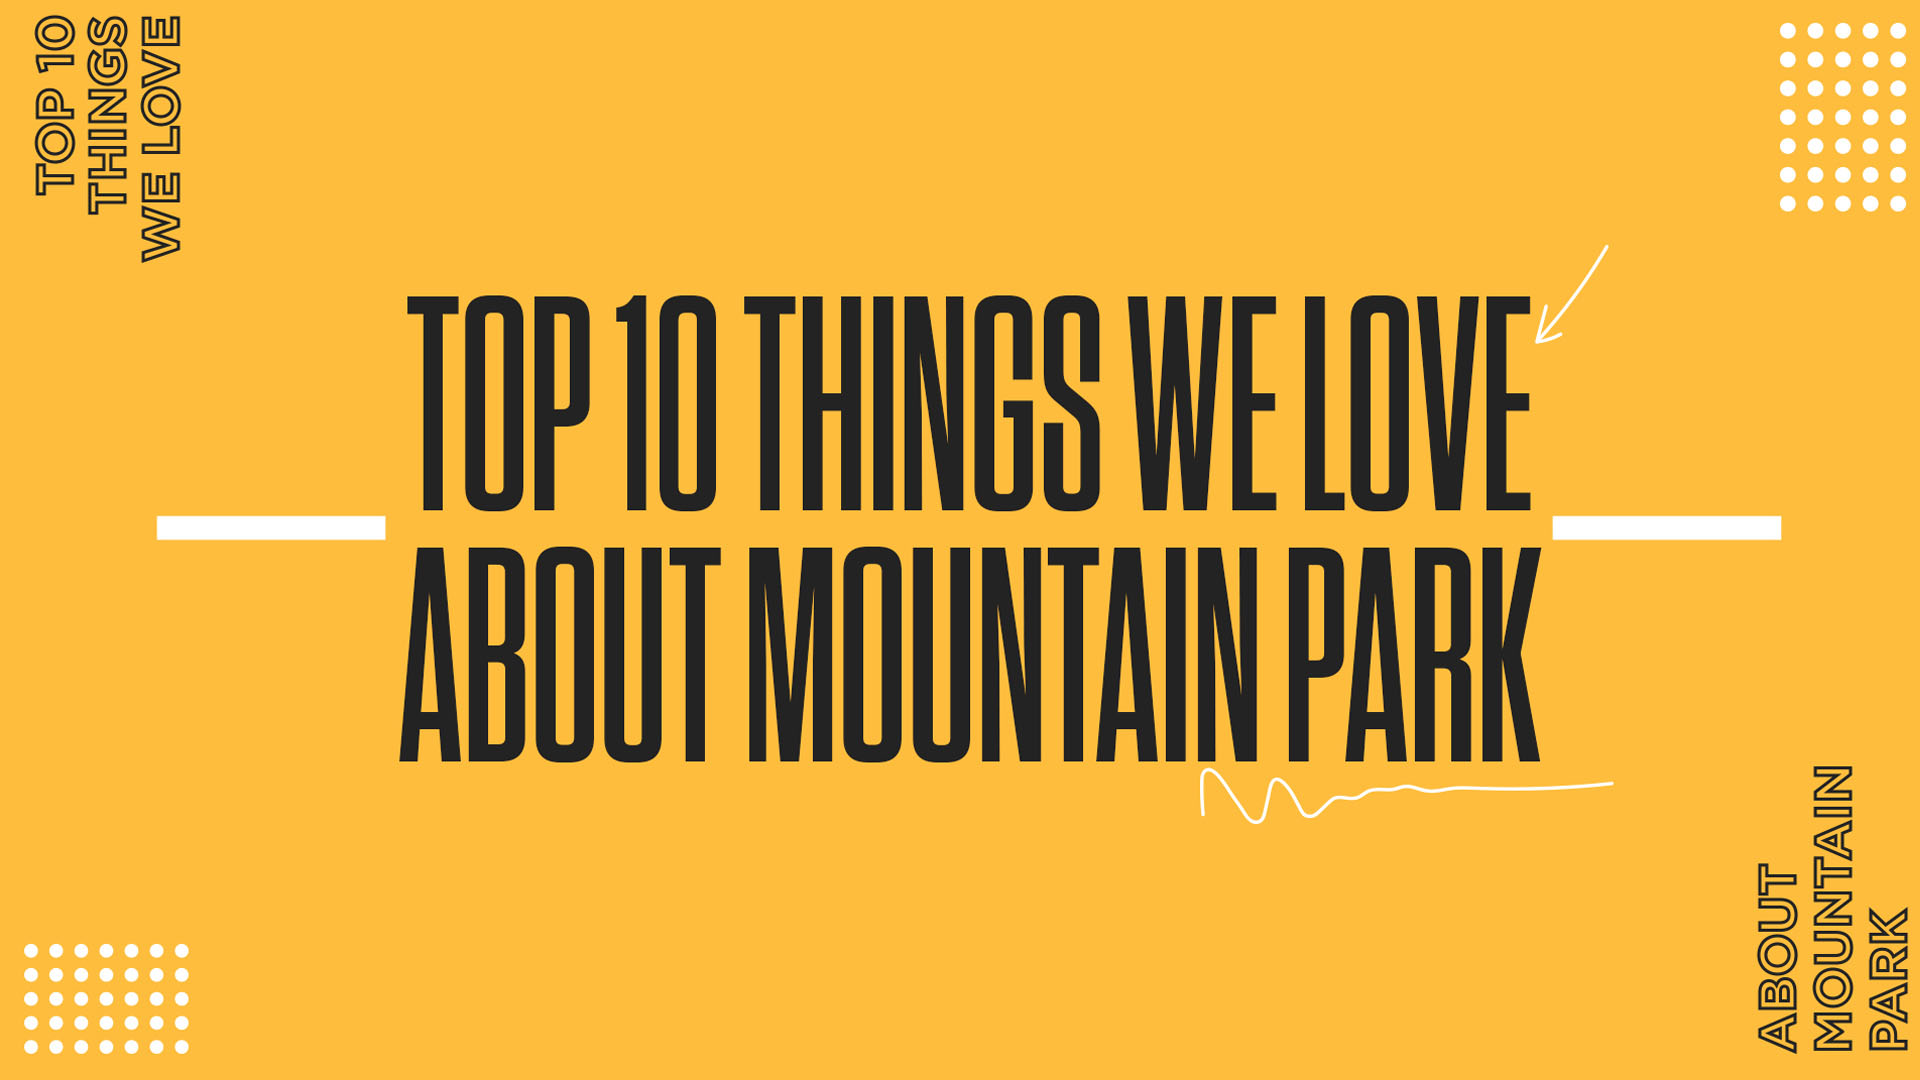 Top 10 Things We Love About Mountain Park